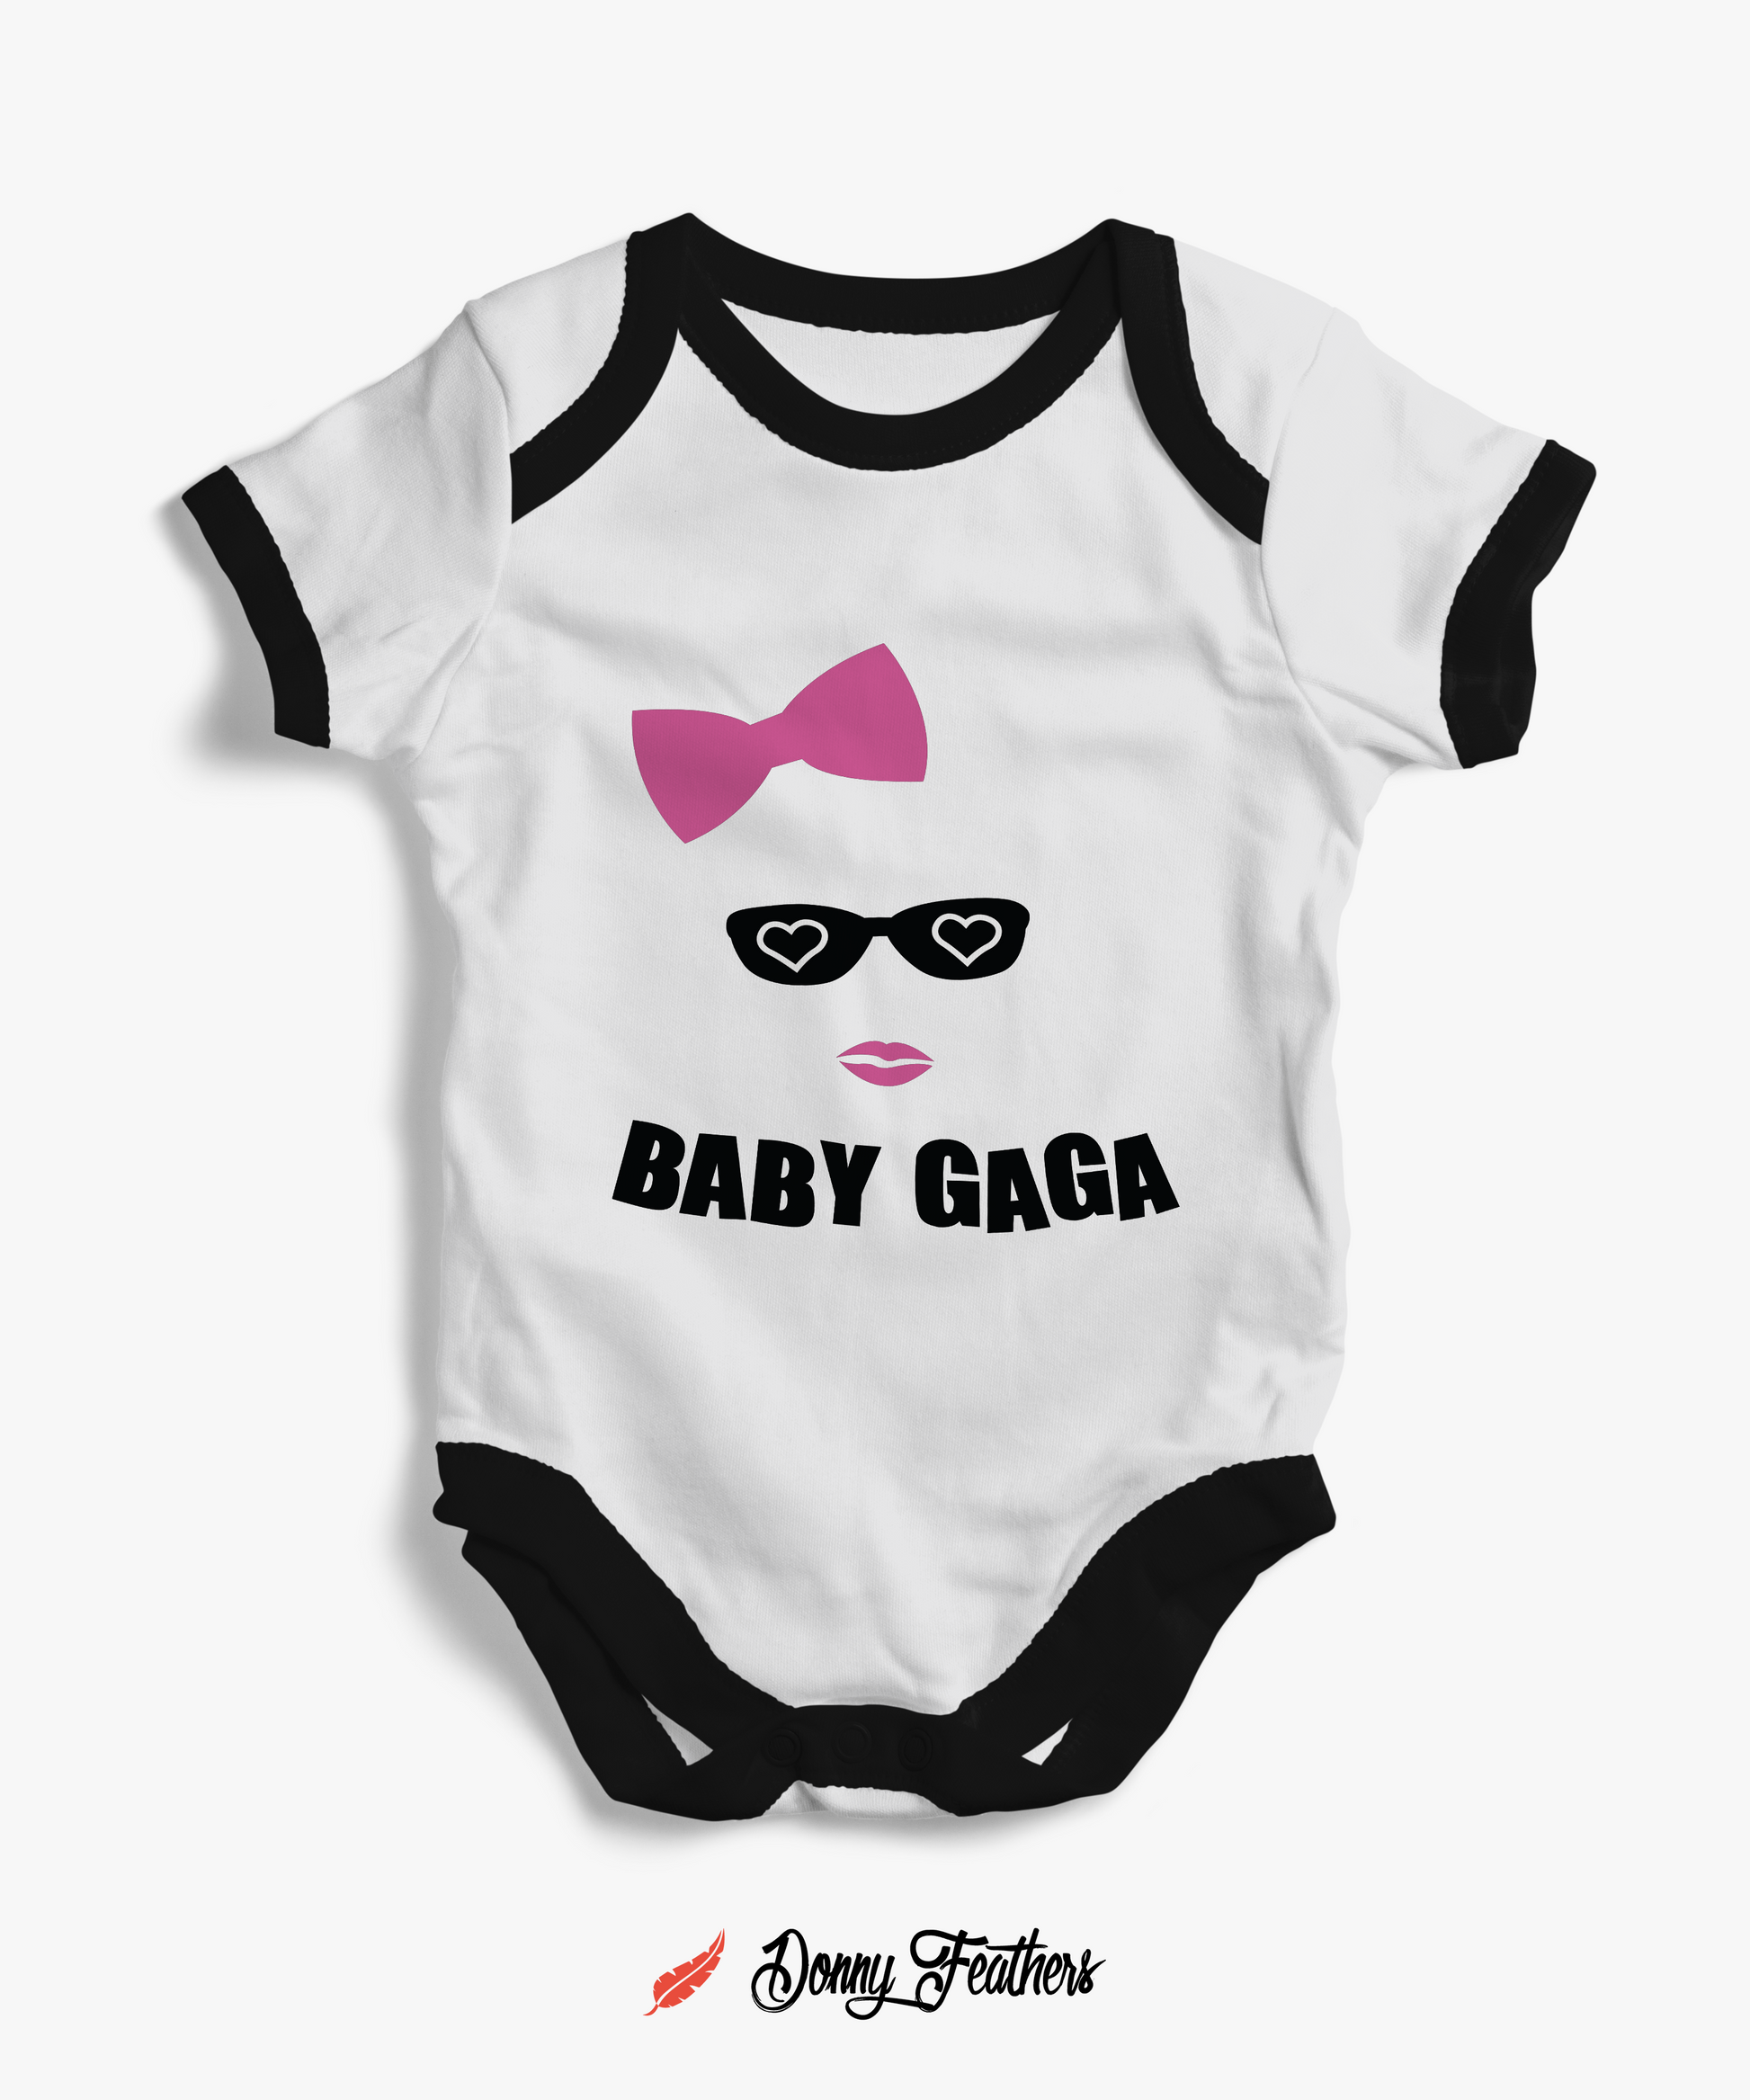 Branded Baby Bodysuits | Baby Gaga Romper (White & Black) By: Donny Feathers